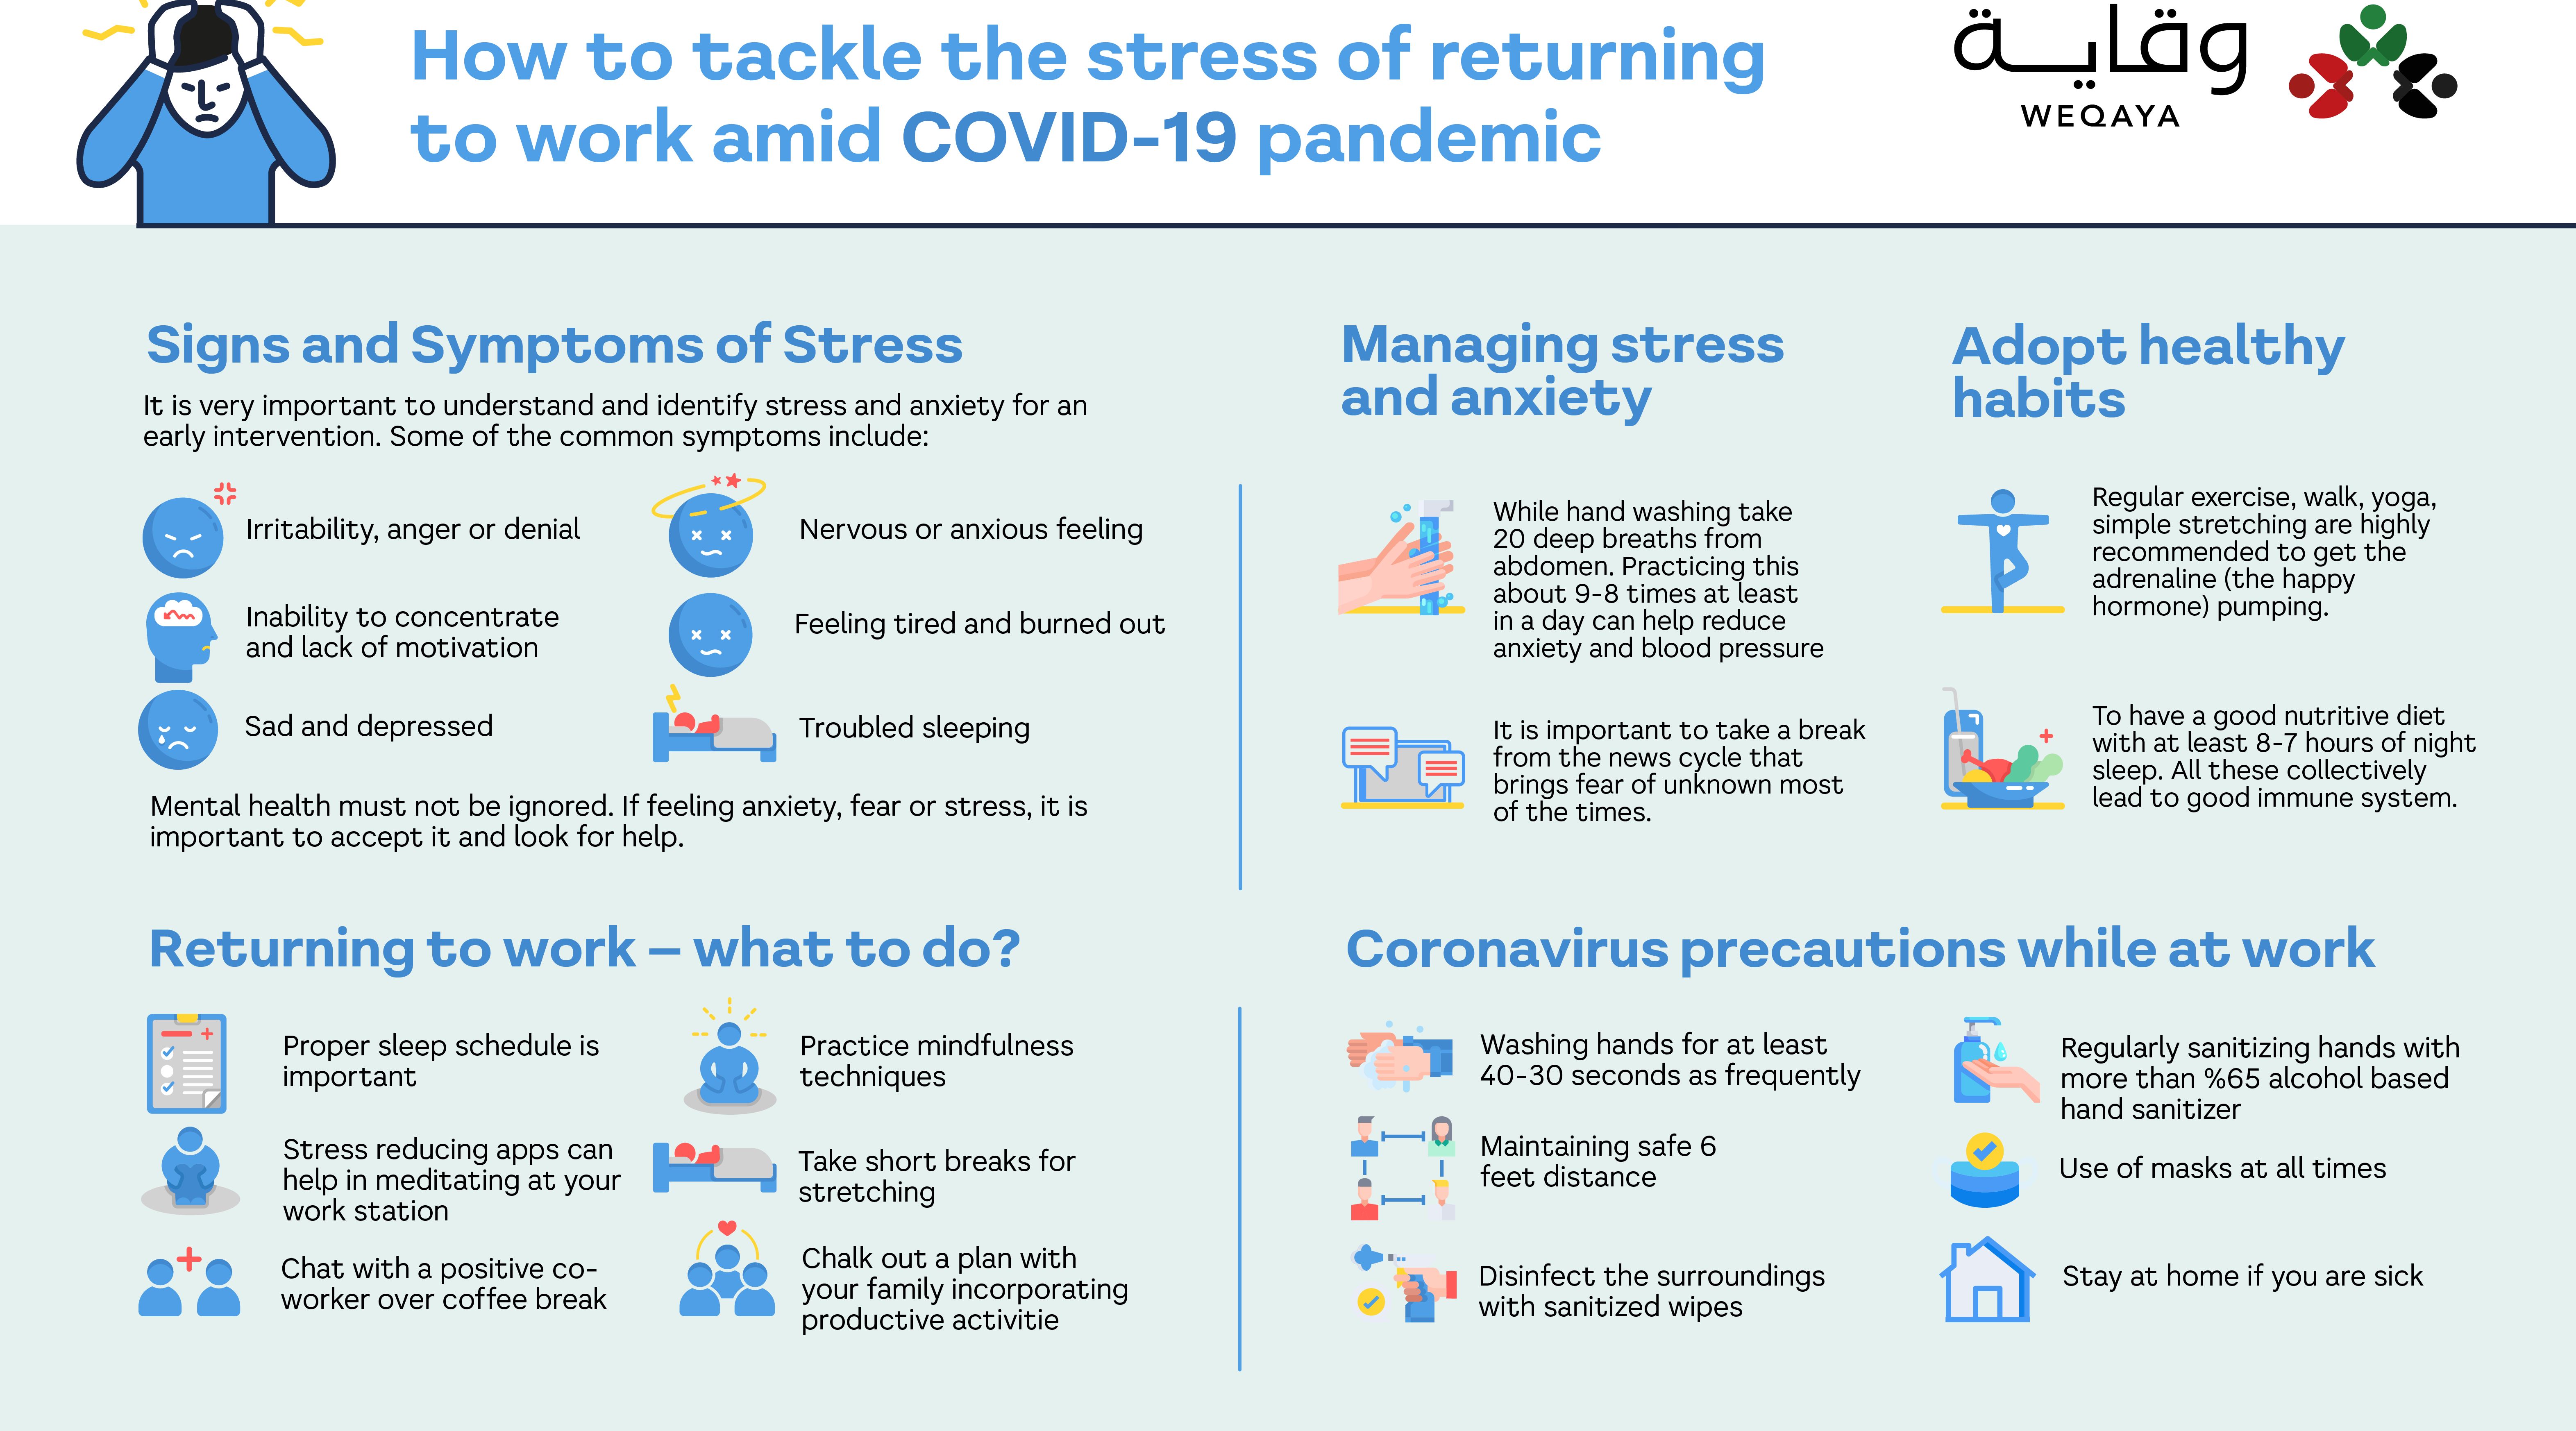 How To Tackle The Stress Of Returning To Work Amid Covid 19 Pandemic 04